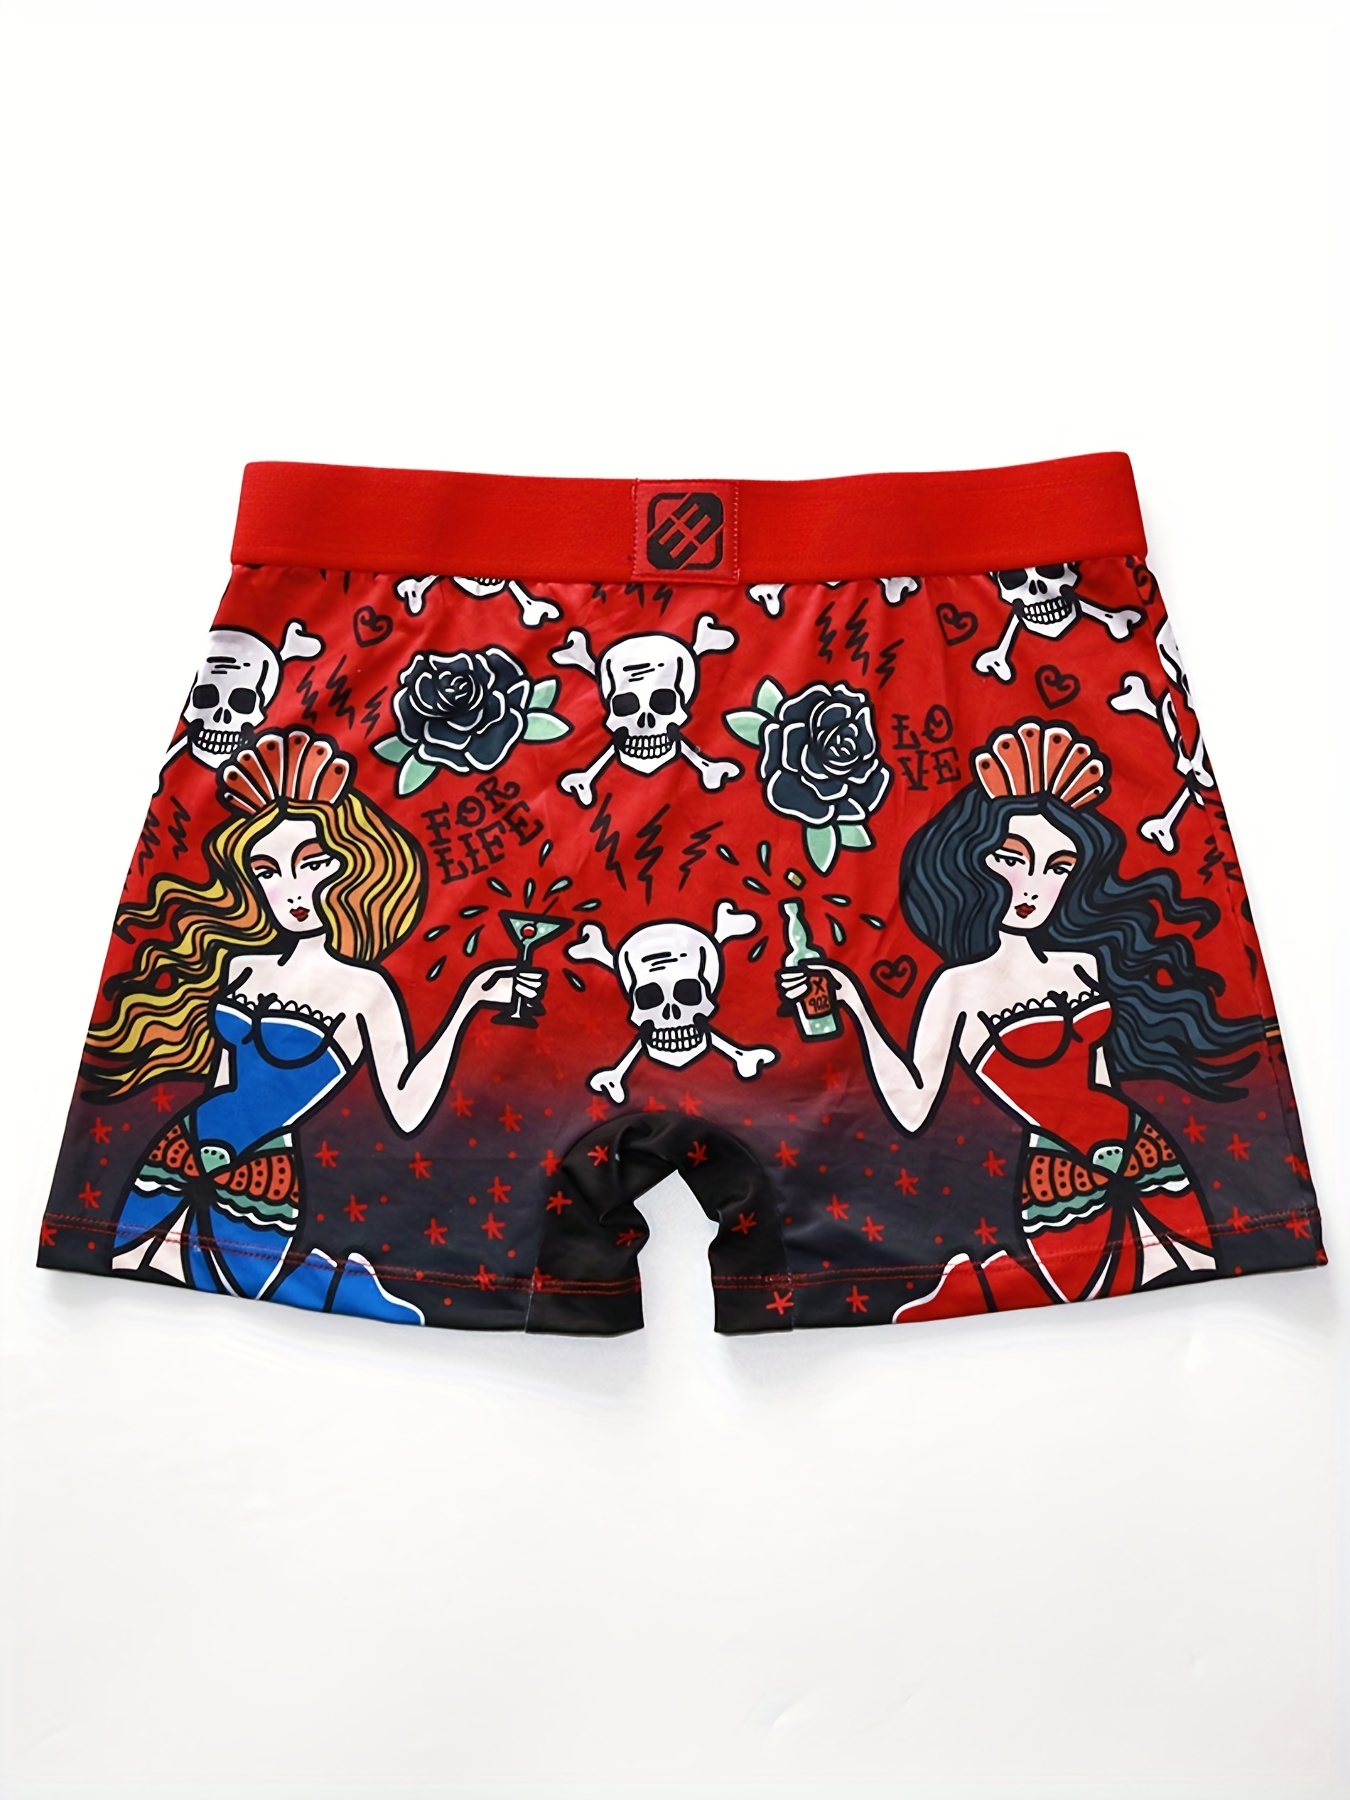 Women Underwear Boxer Comfy Panties Shorts For Girl Intimate